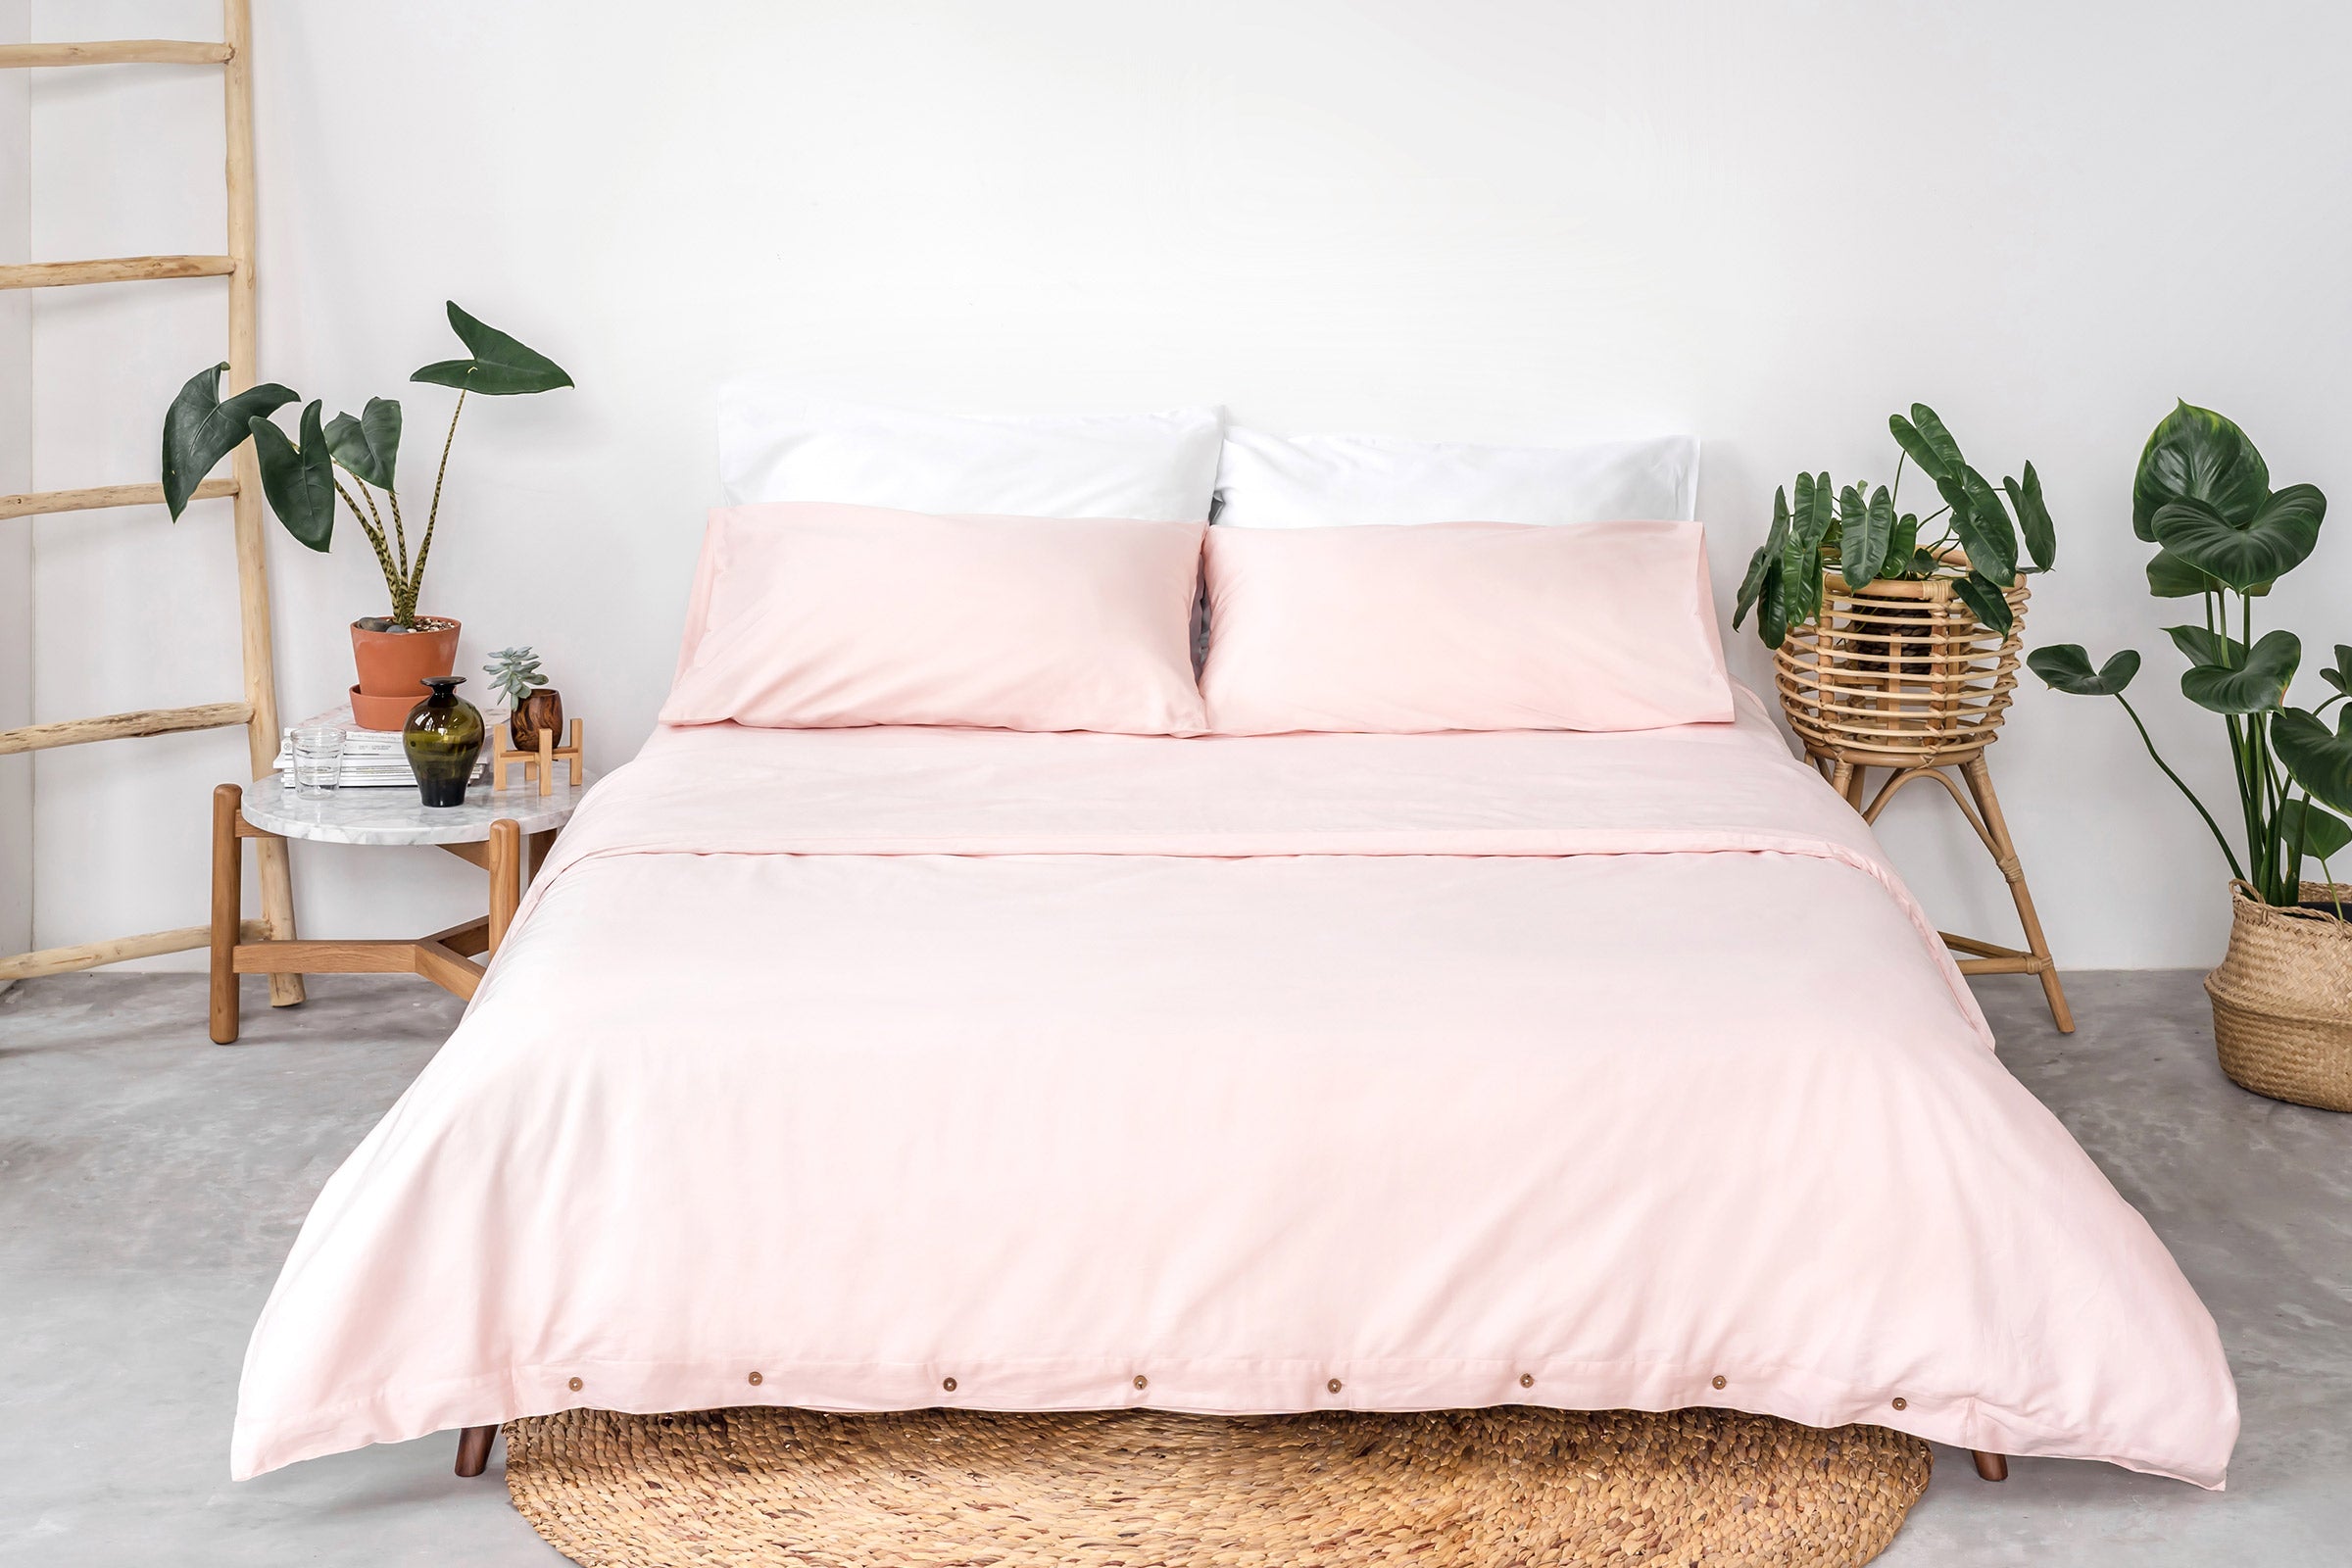 classic-blush-duvet-cover-fitted-sheet-pillowcase-pair-by-sojao.jpg